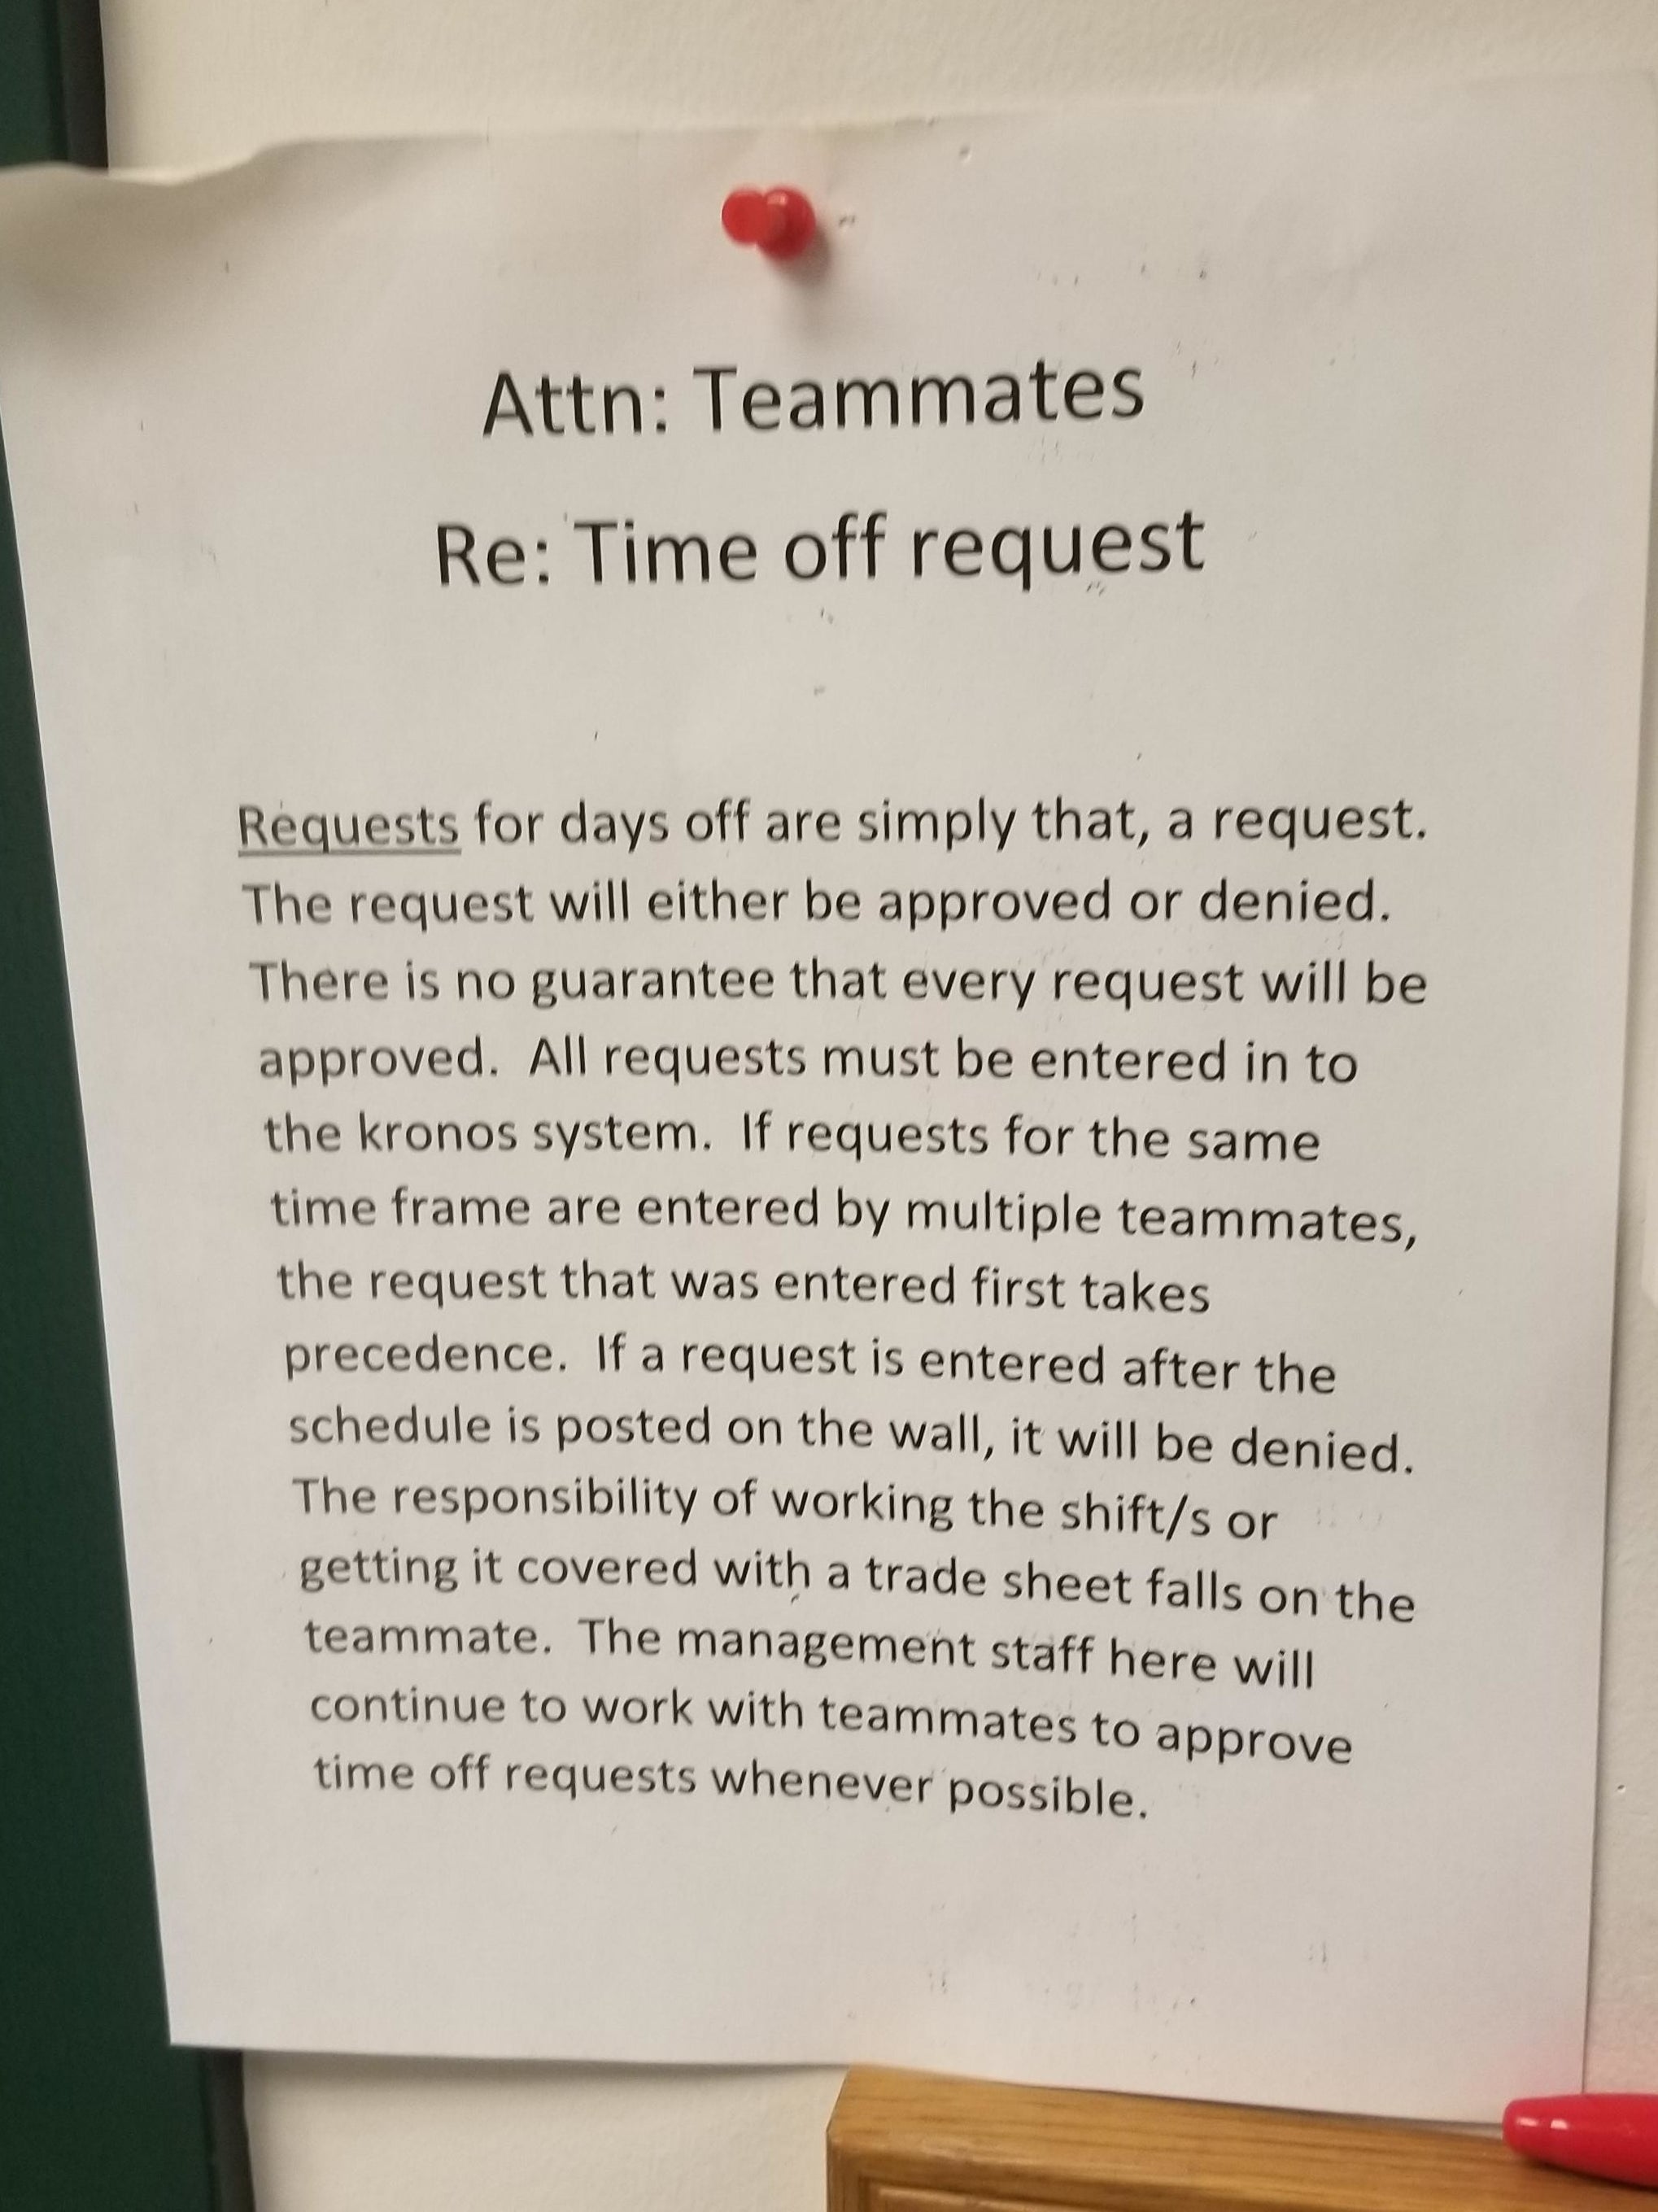 &quot;Requests for days off are simply that, a request.&quot;